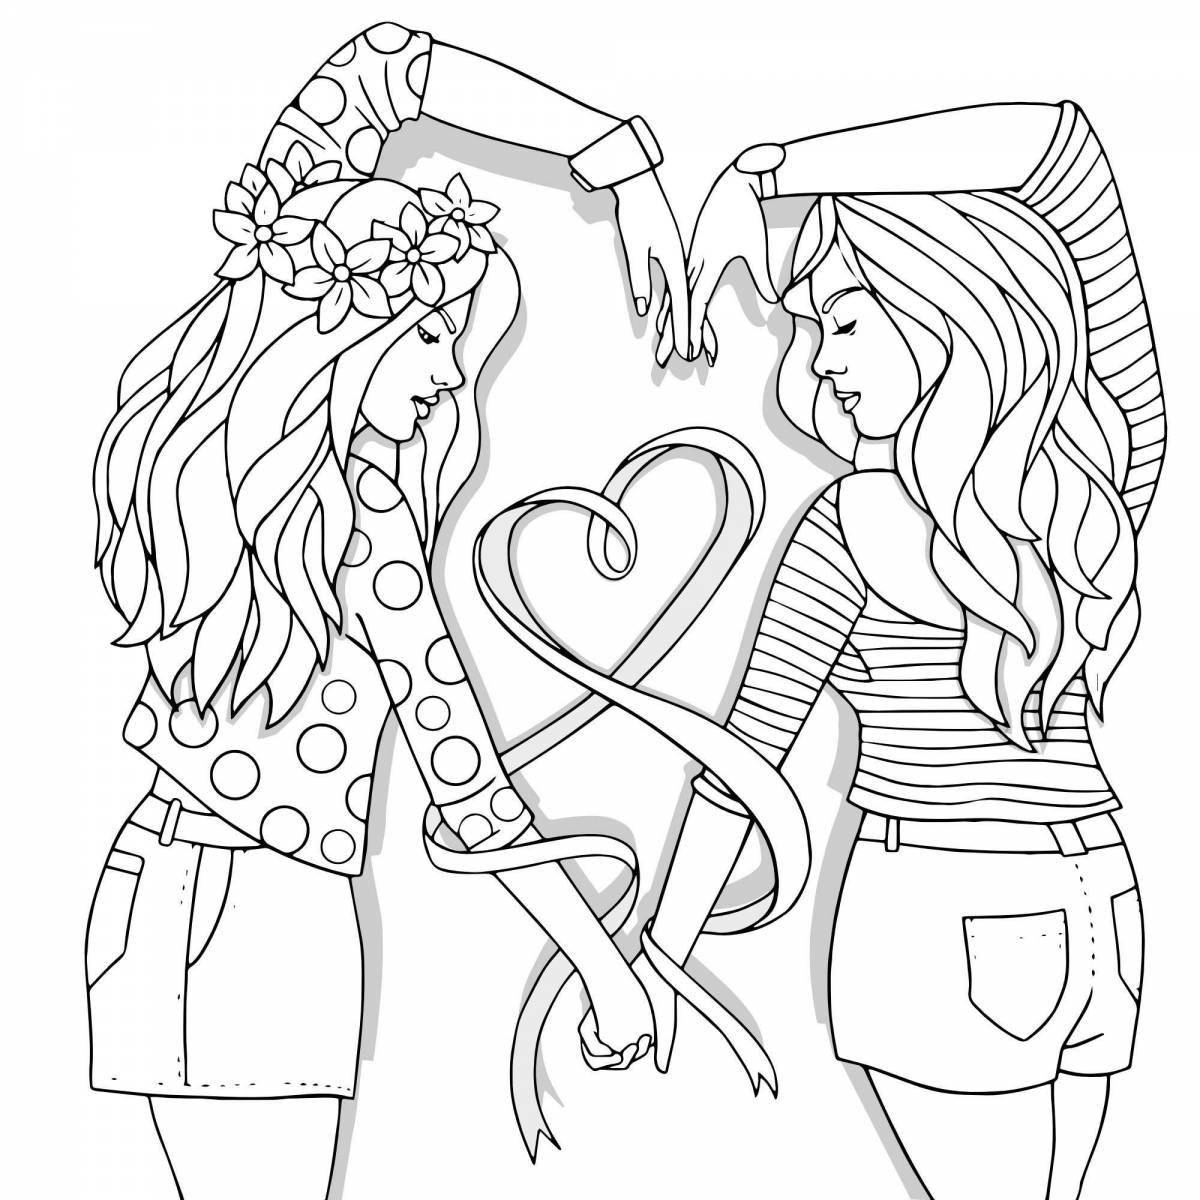 Amazing coloring book for girls 13 years old